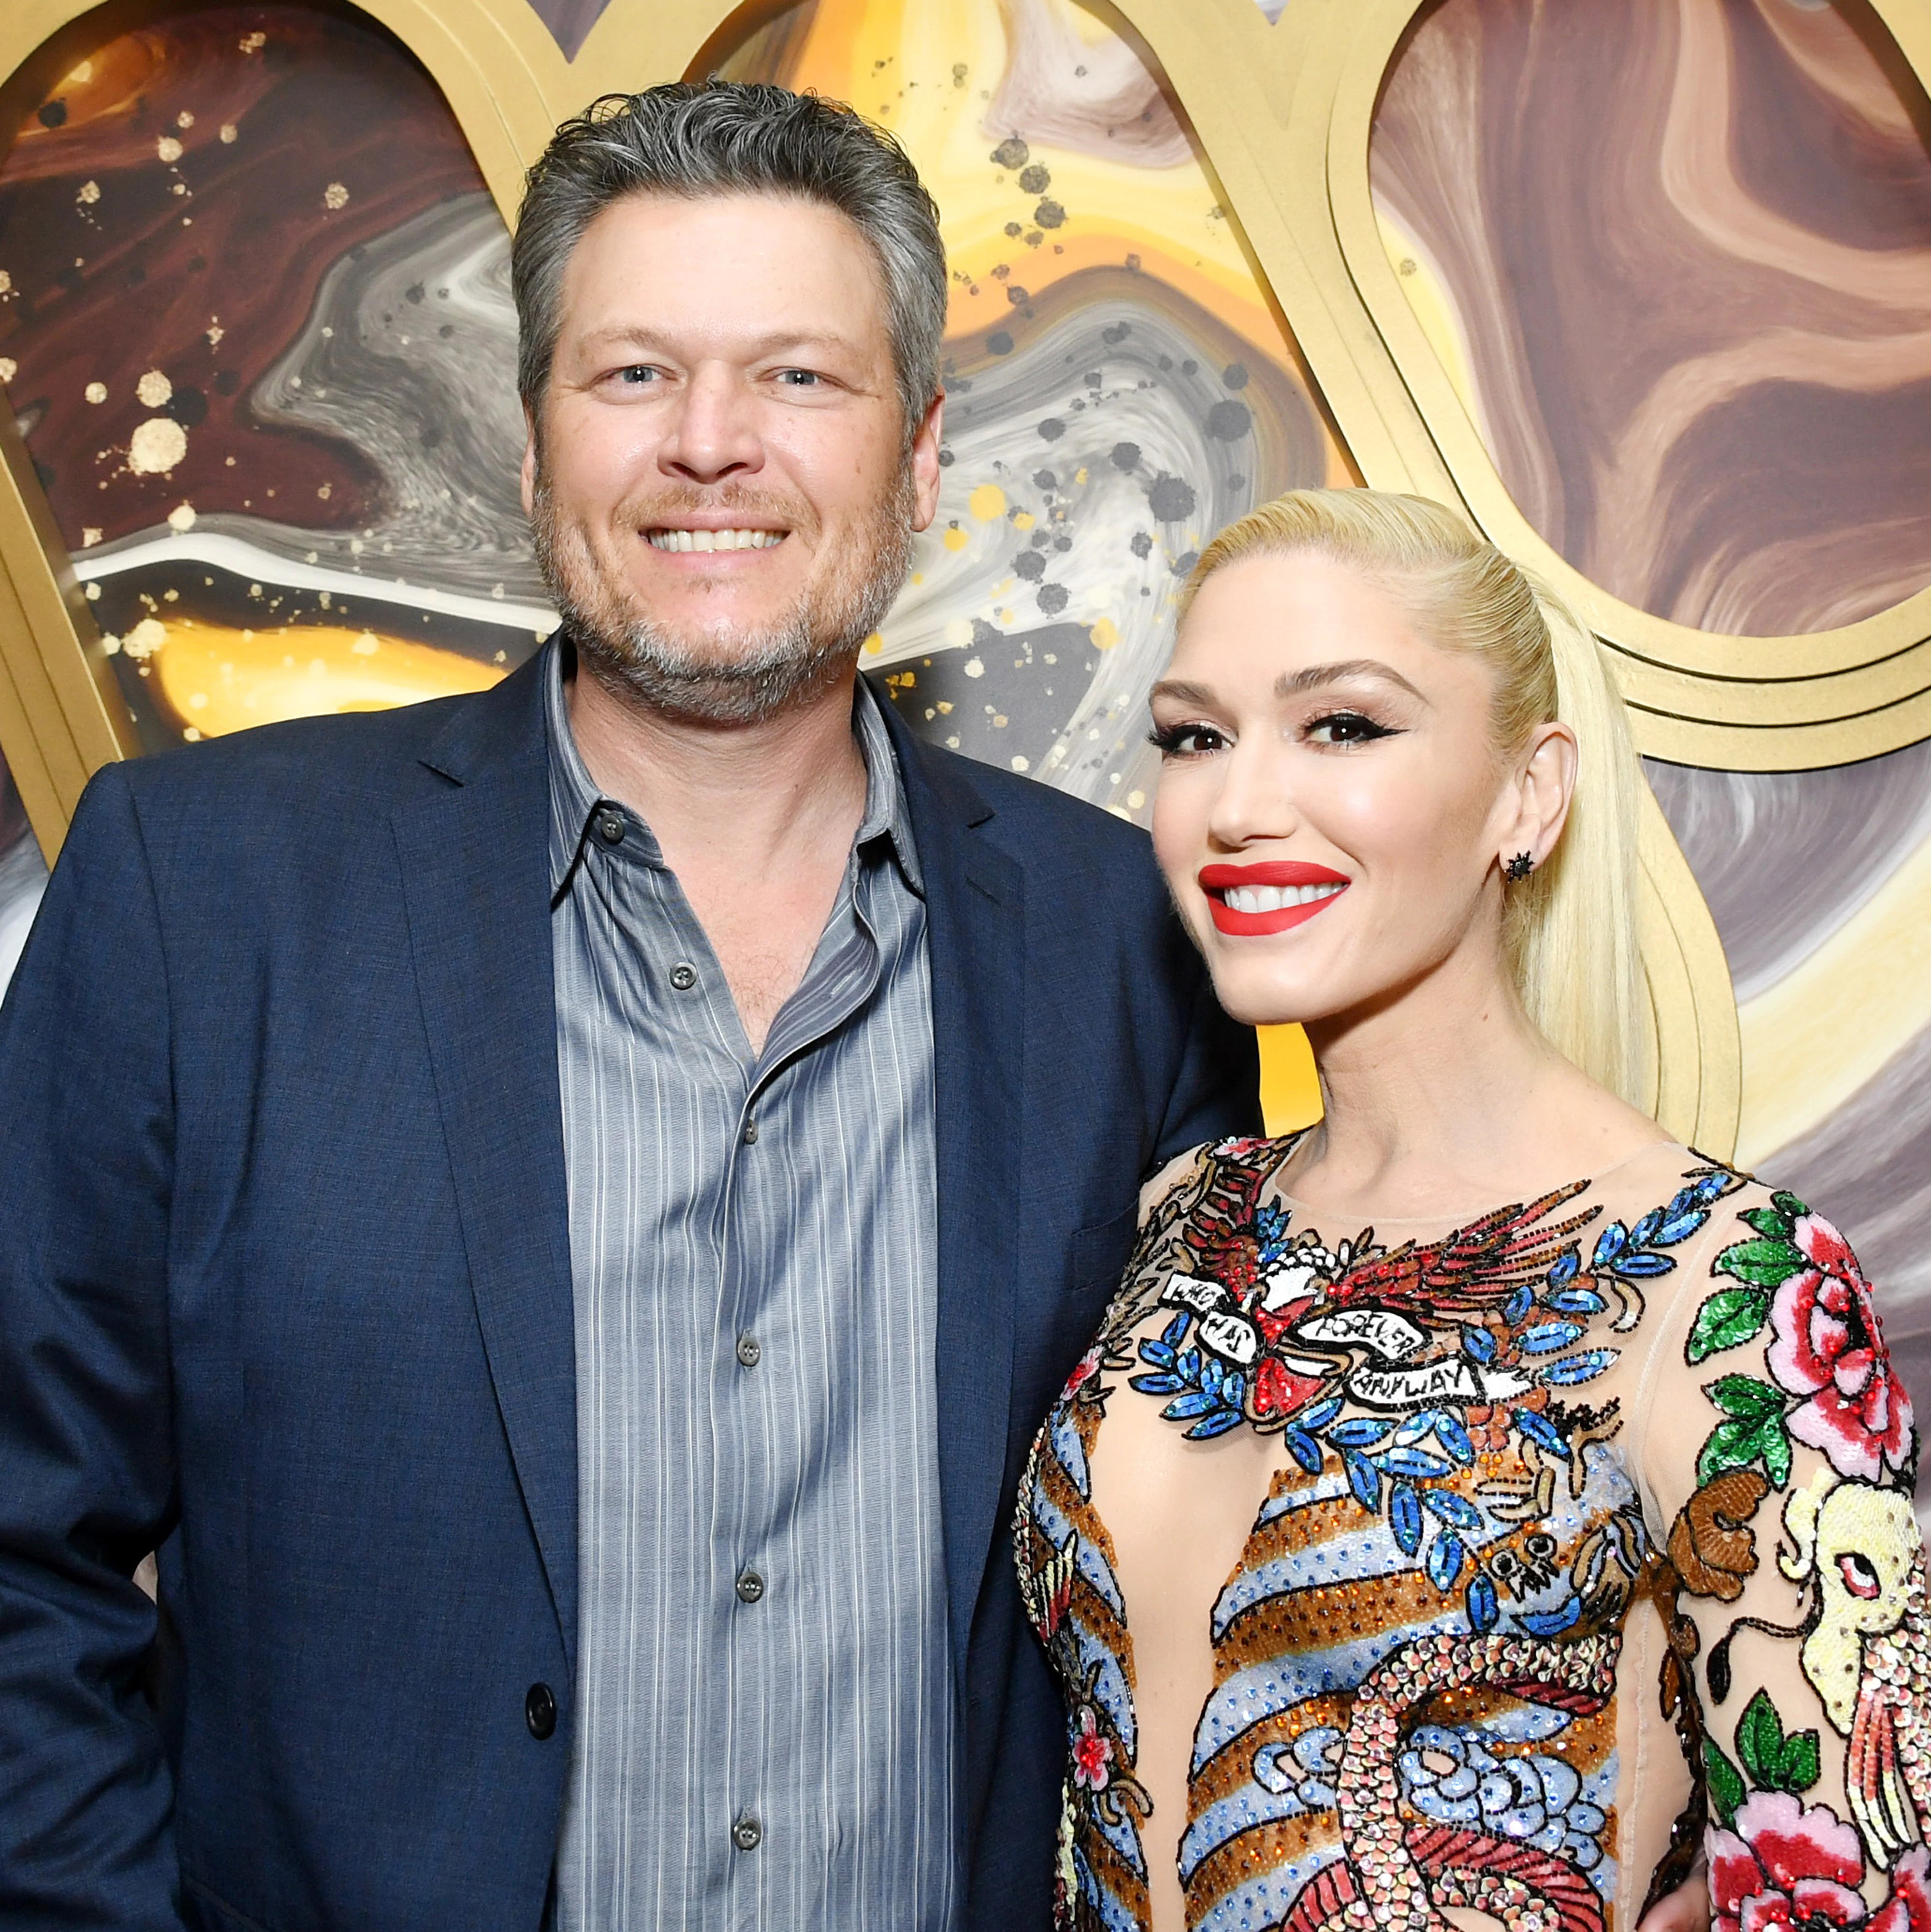 Does Blake Shelton Have Kids? The Country Singer Has A Unique Role